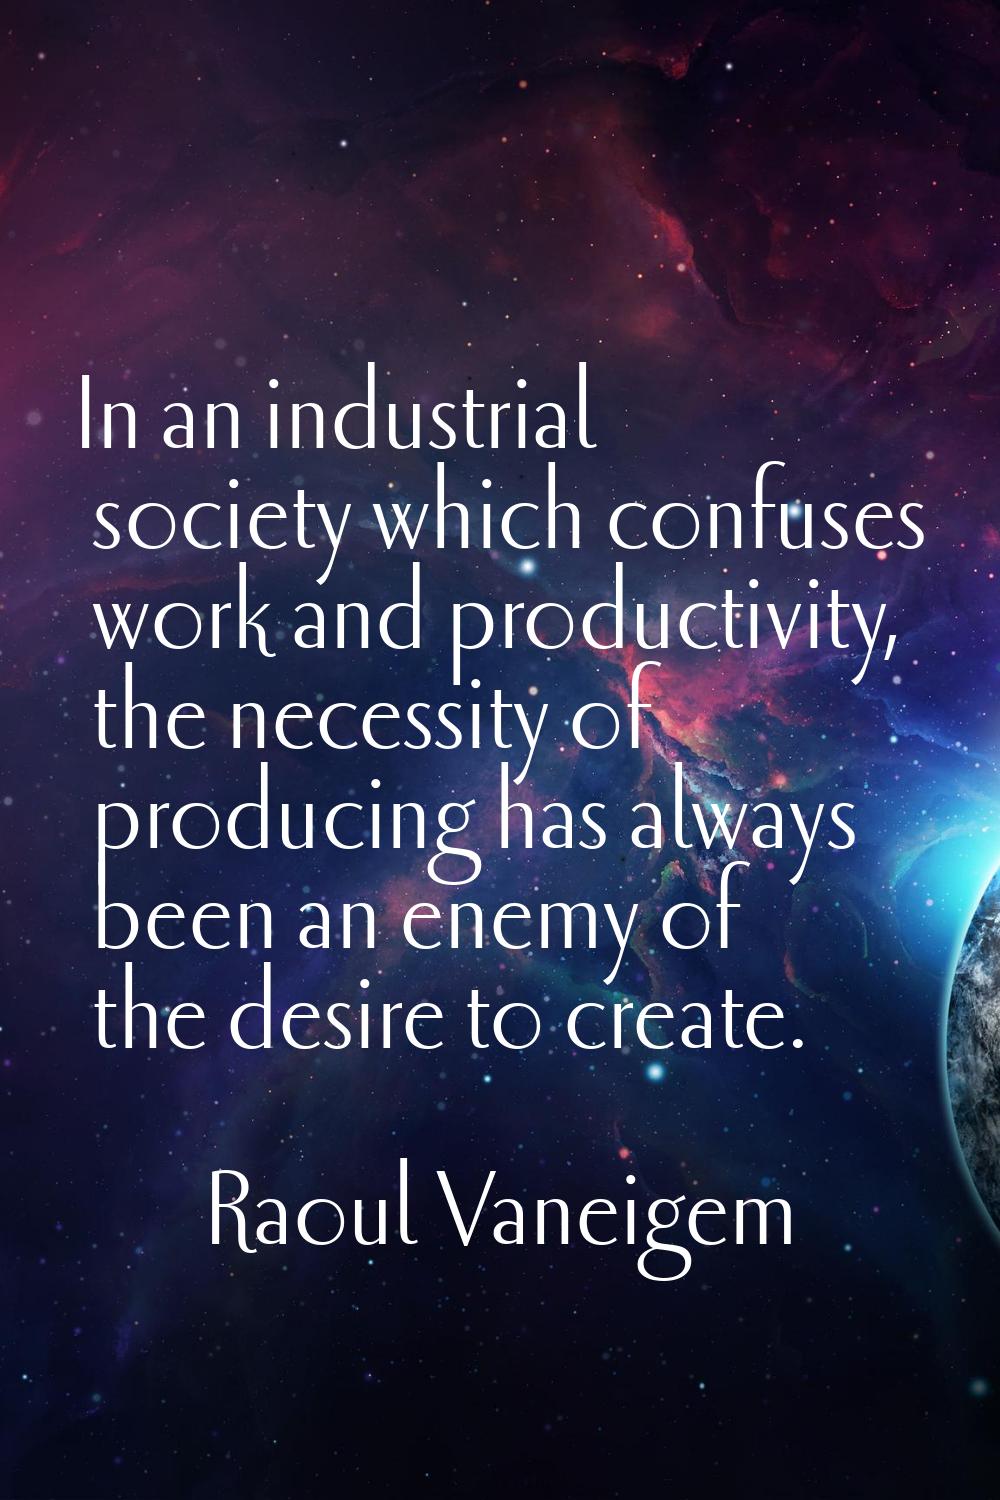 In an industrial society which confuses work and productivity, the necessity of producing has alway